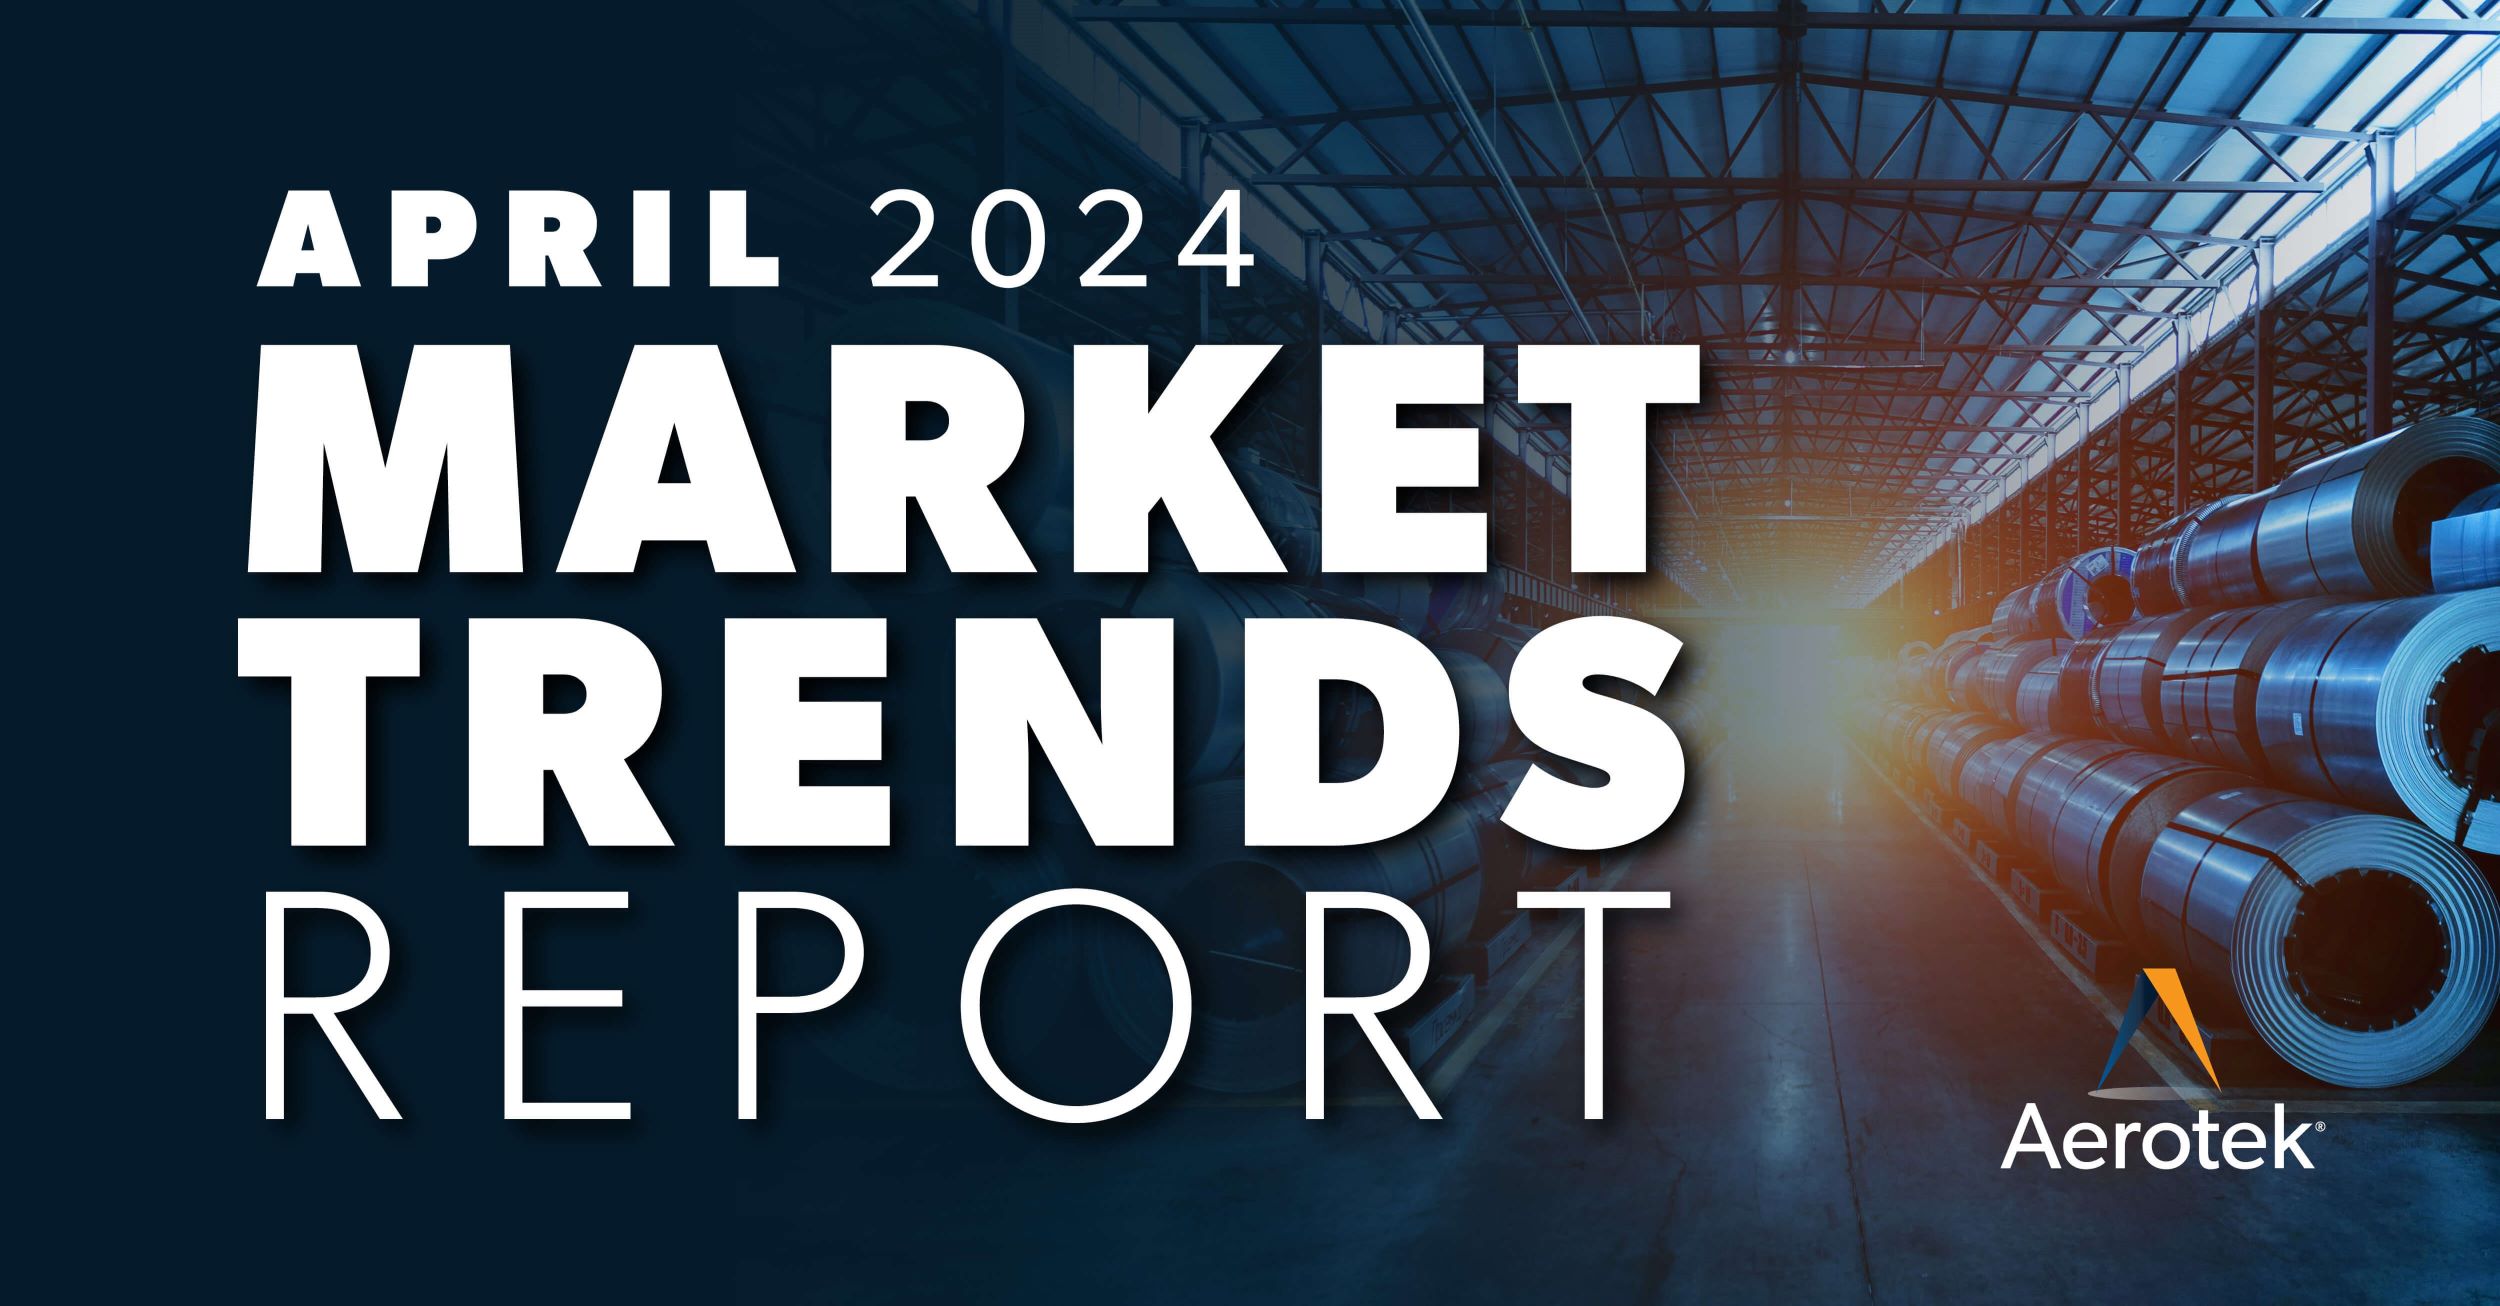 A graphic that says April 2024 Market Trends Report with Aerotek's logo in the bottom right corner